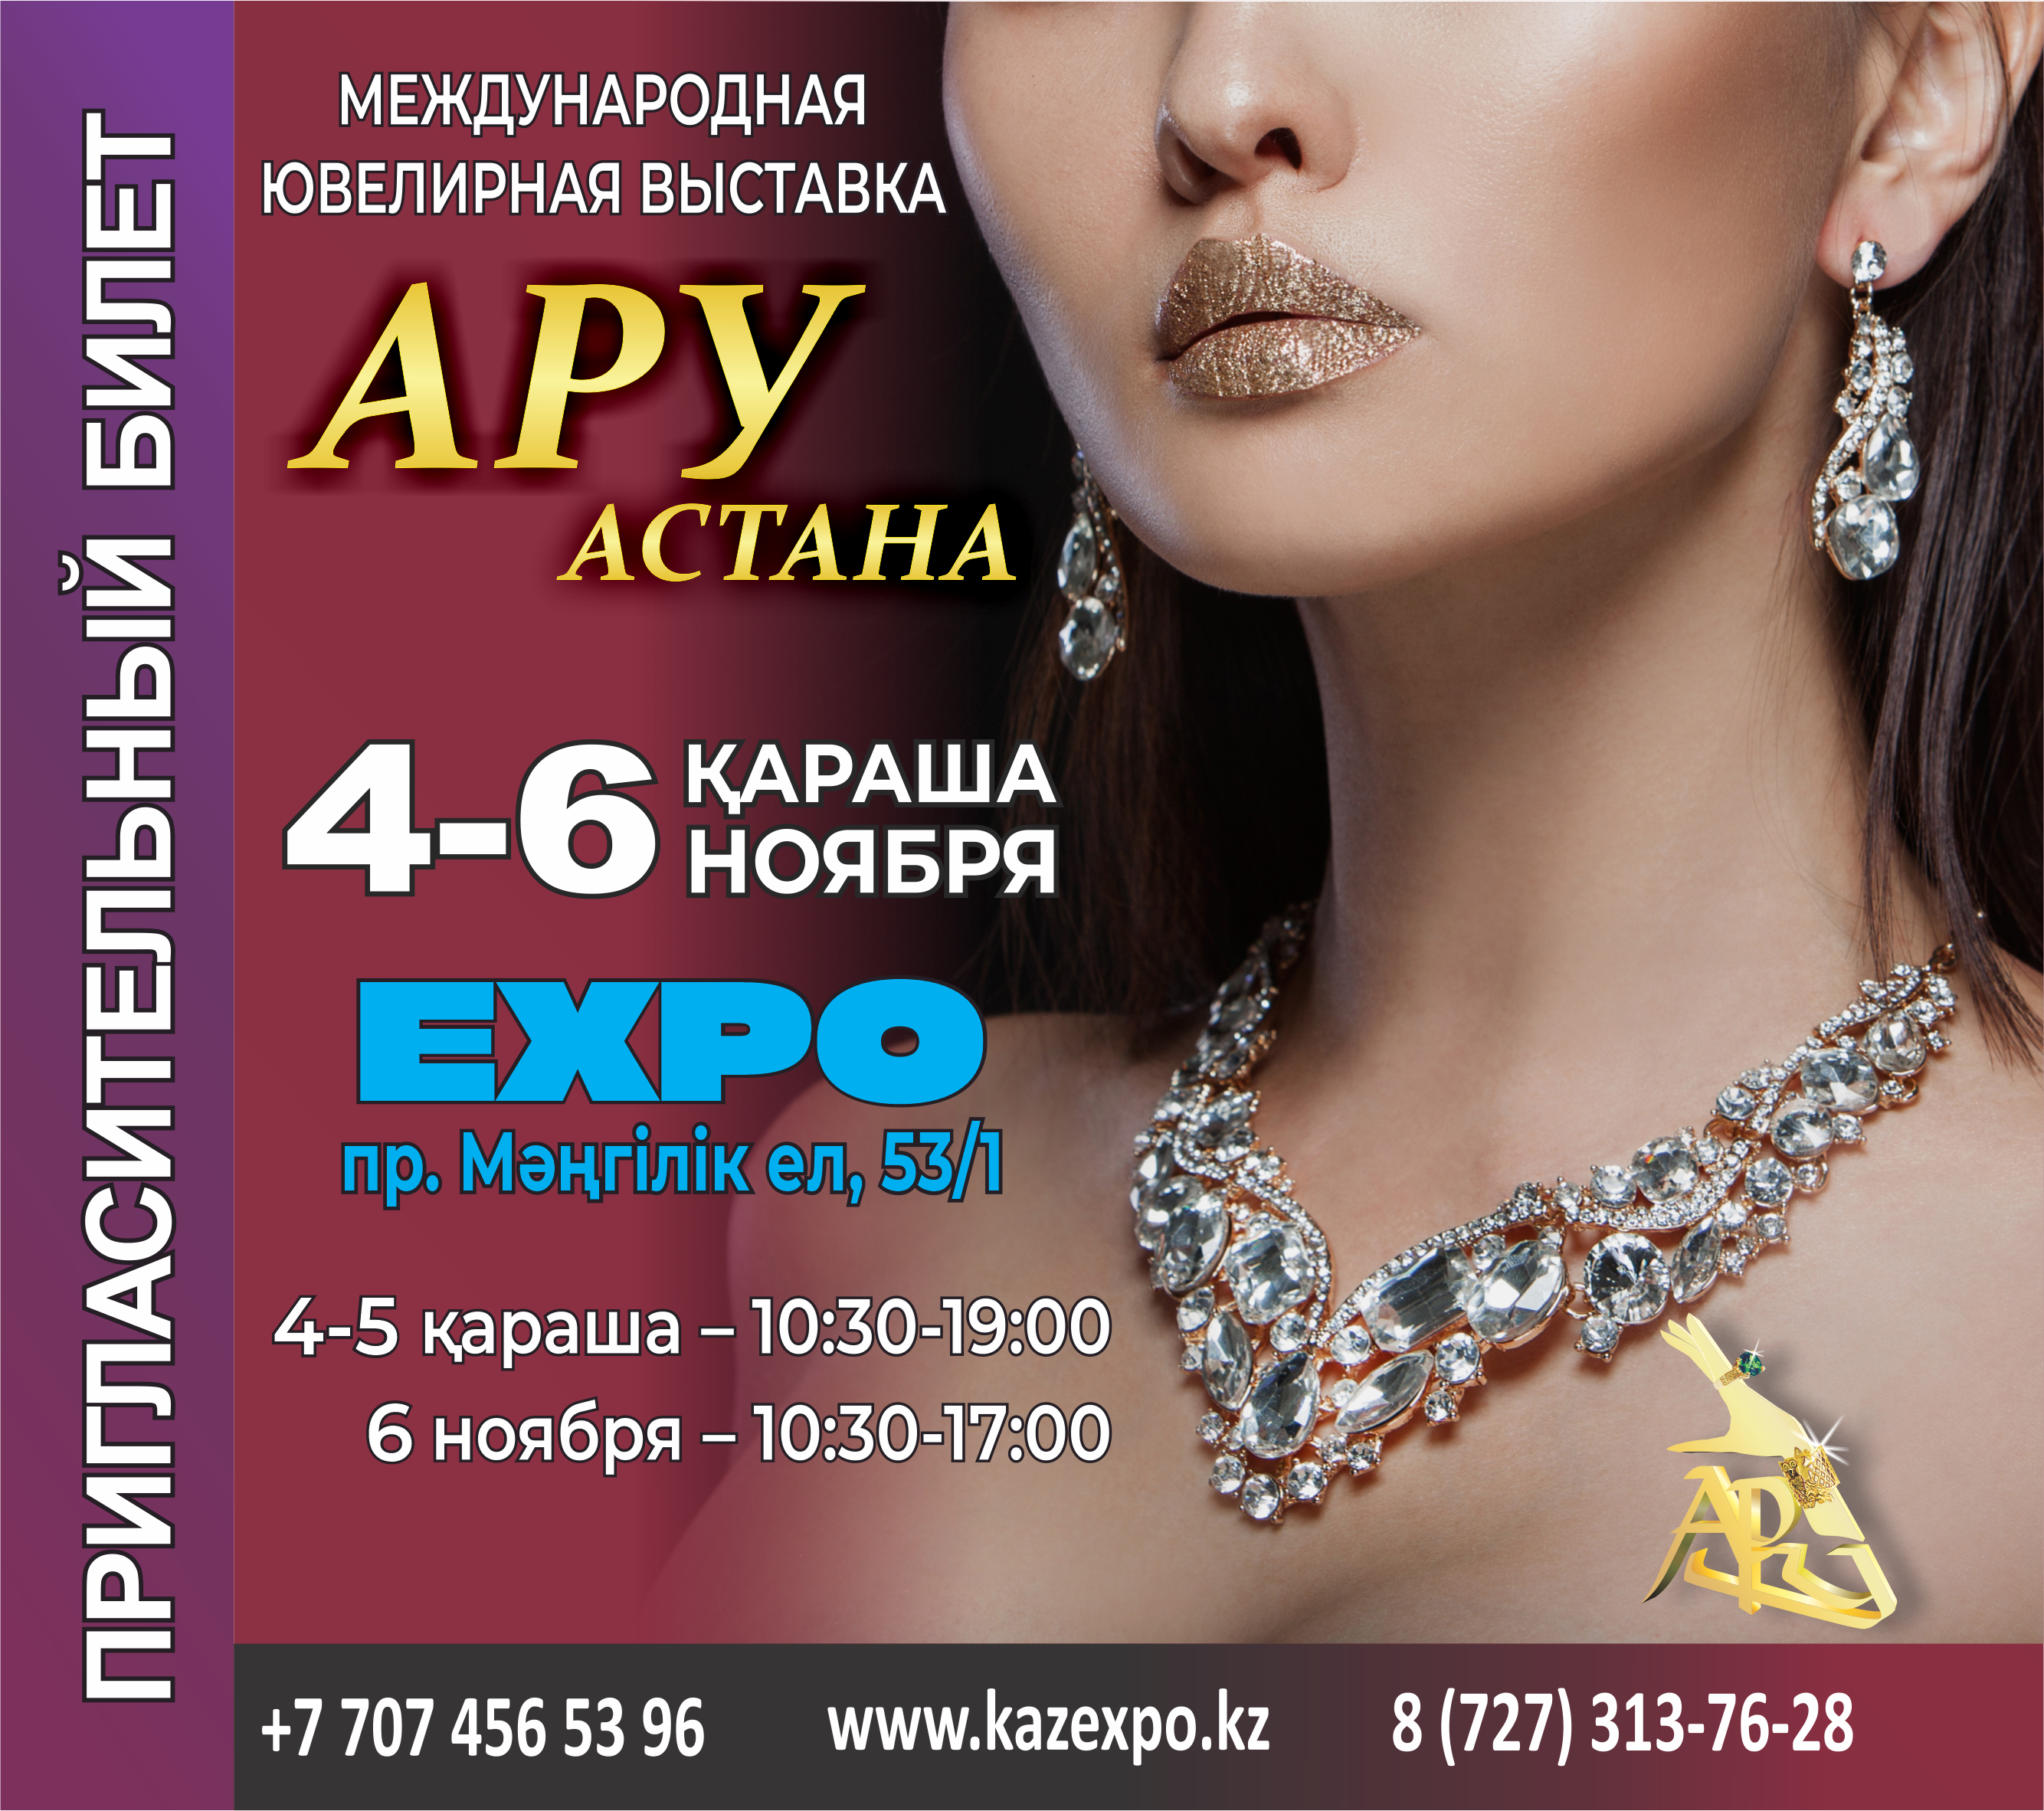 “Aru 2022” Jewelry Exhibition will be held at EXPO IEC